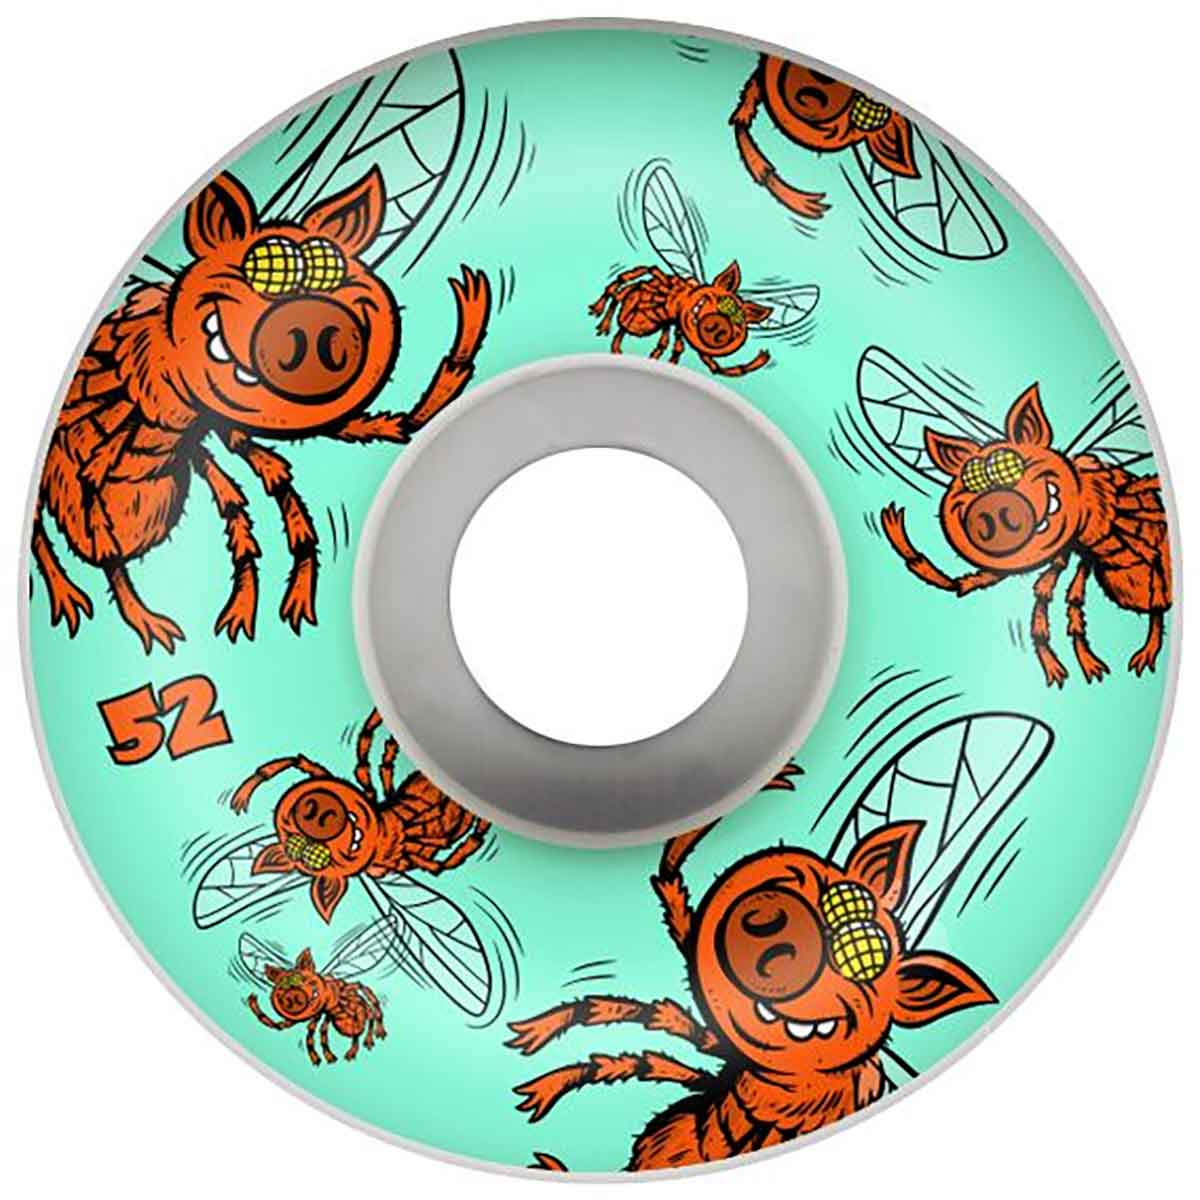 52mm 101a Pig Pigs Fly Wheels - White